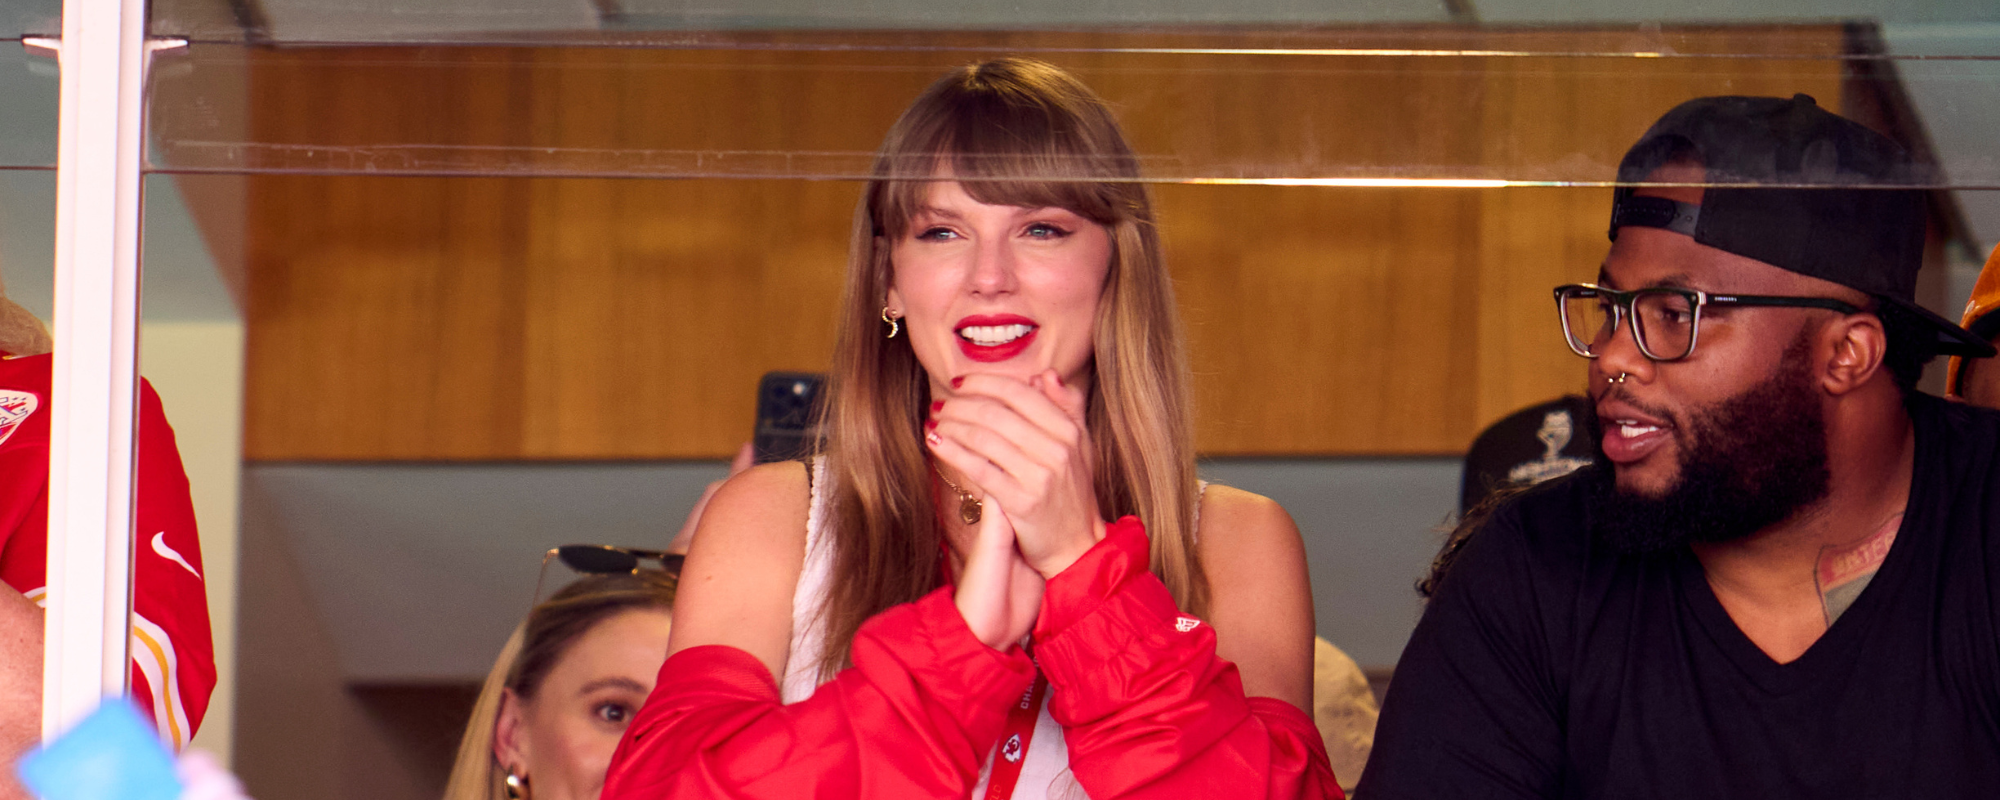 Taylor Swift Brings Reported Bump in Female Viewership to ‘NFL on NBC’